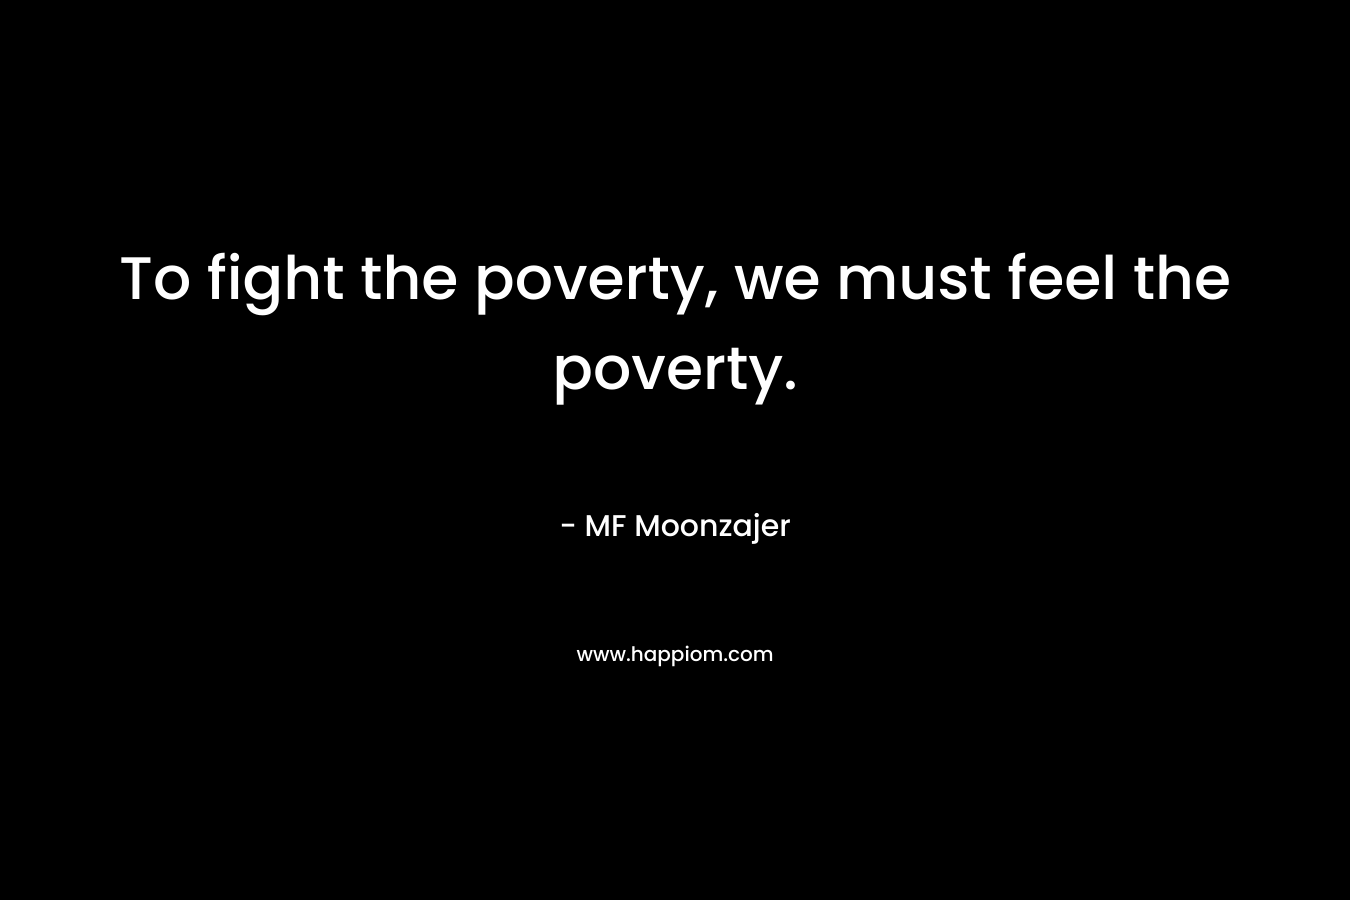 To fight the poverty, we must feel the poverty.